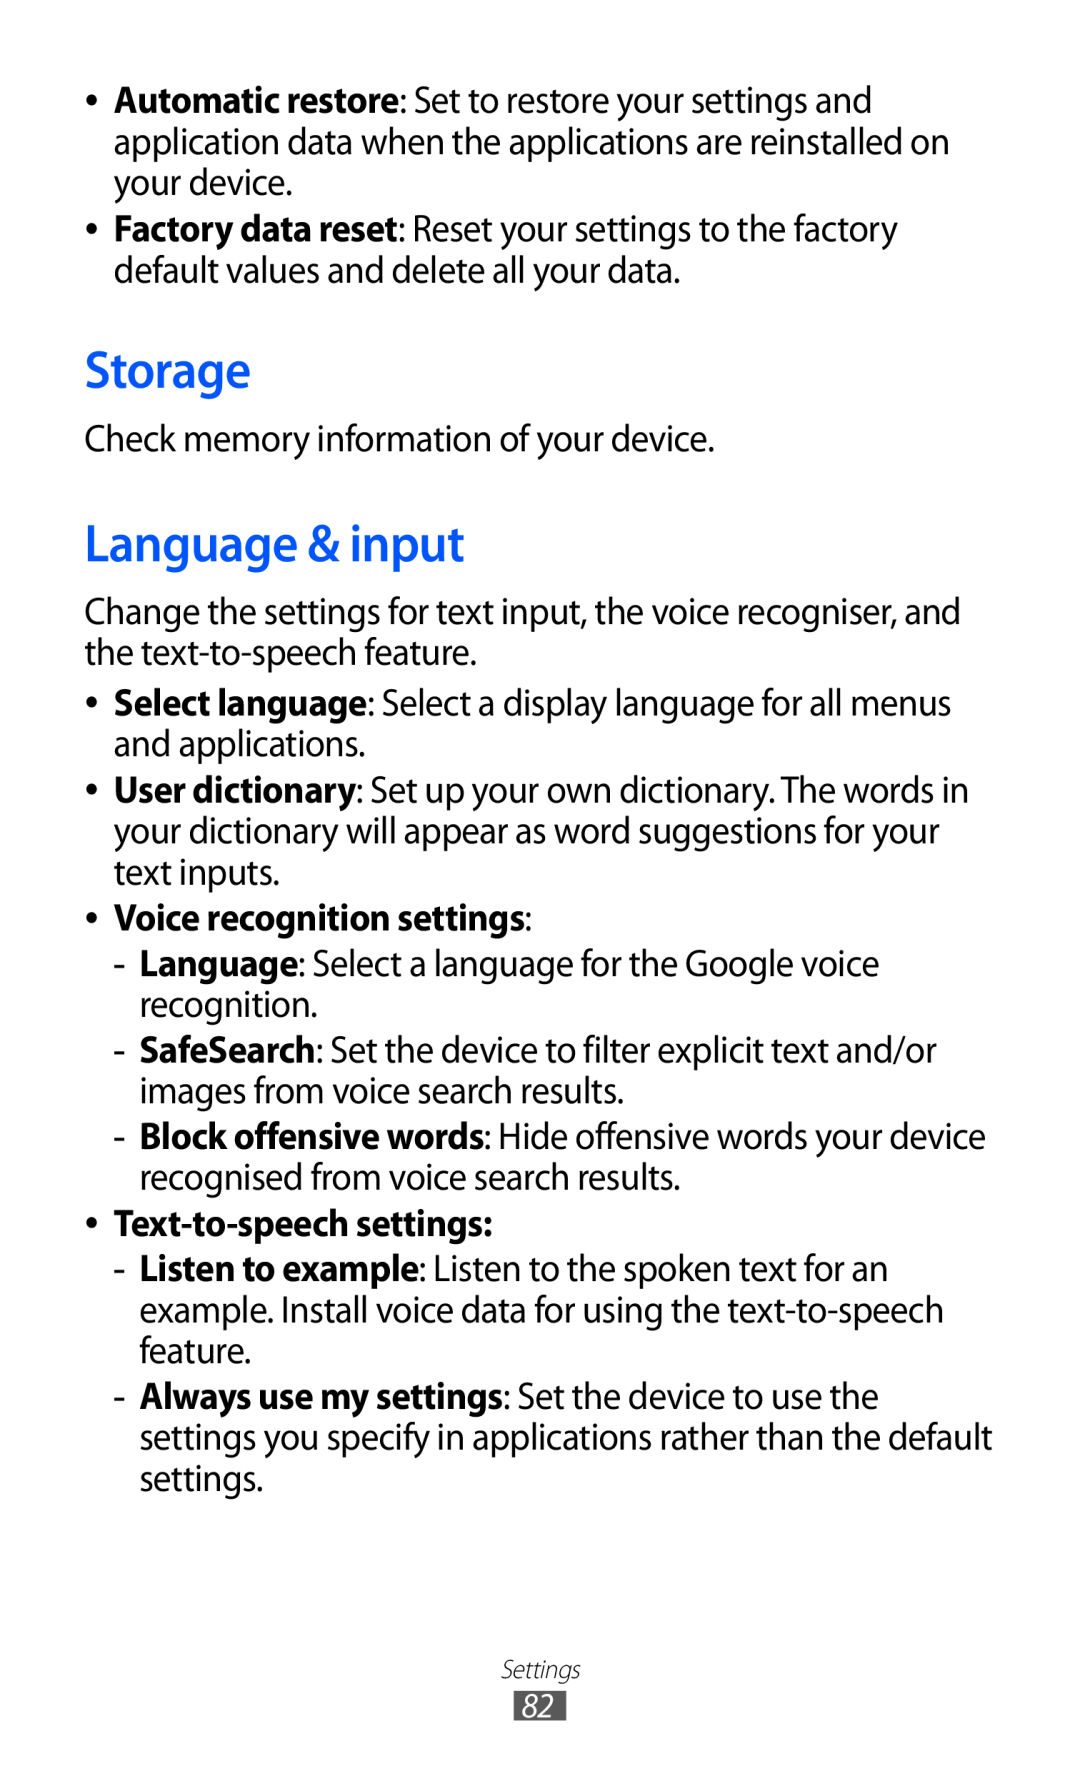 Samsung GT-P7510 user manual Storage, Language & input, Voice recognition settings, Text-to-speech settings 